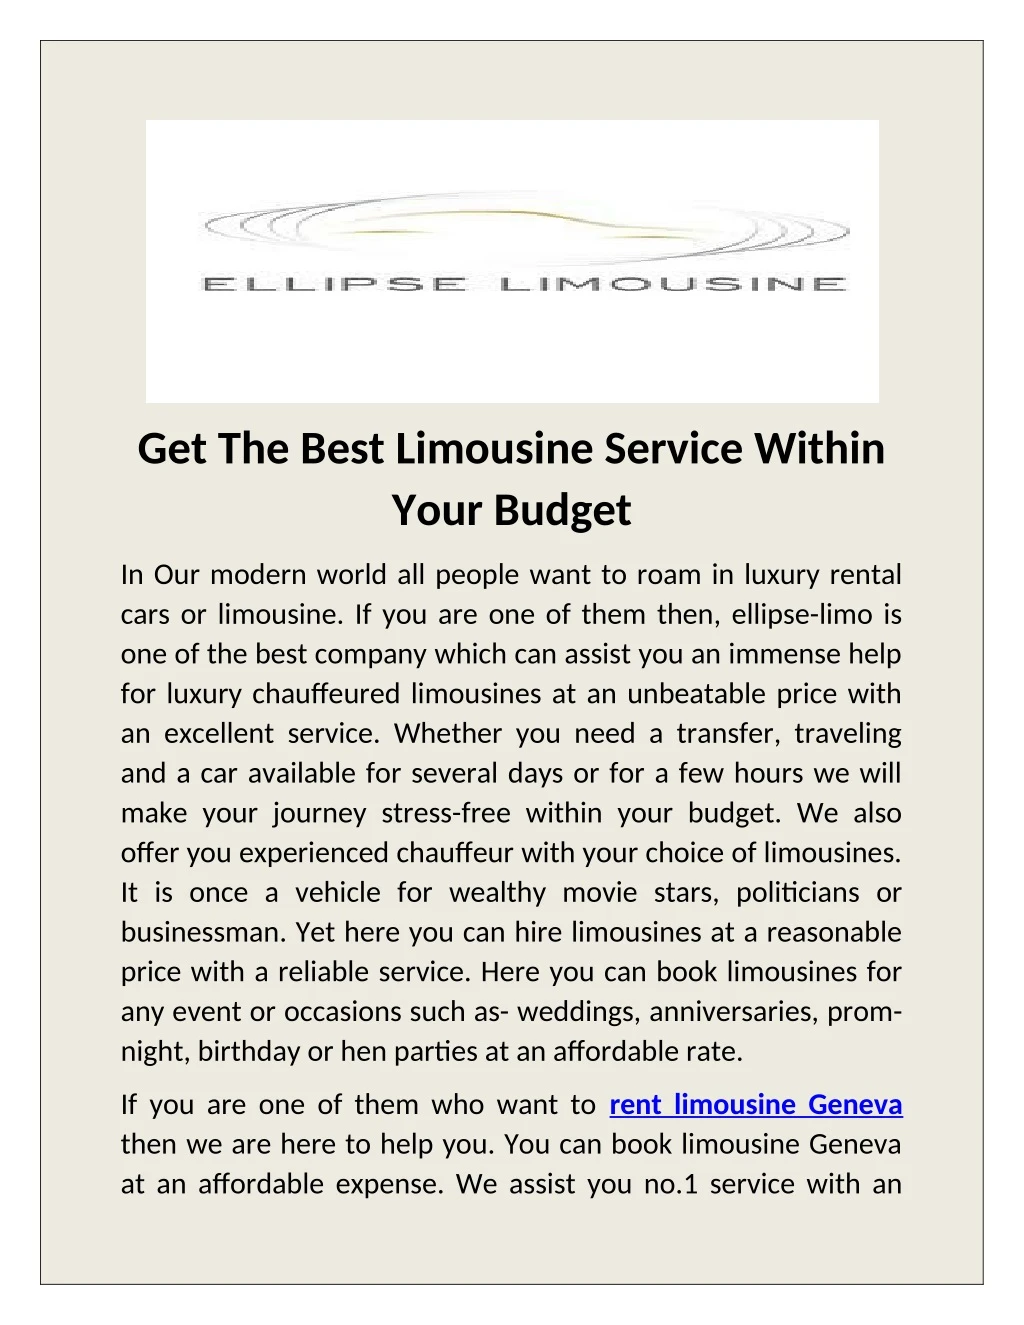 get the best limousine service within your budget